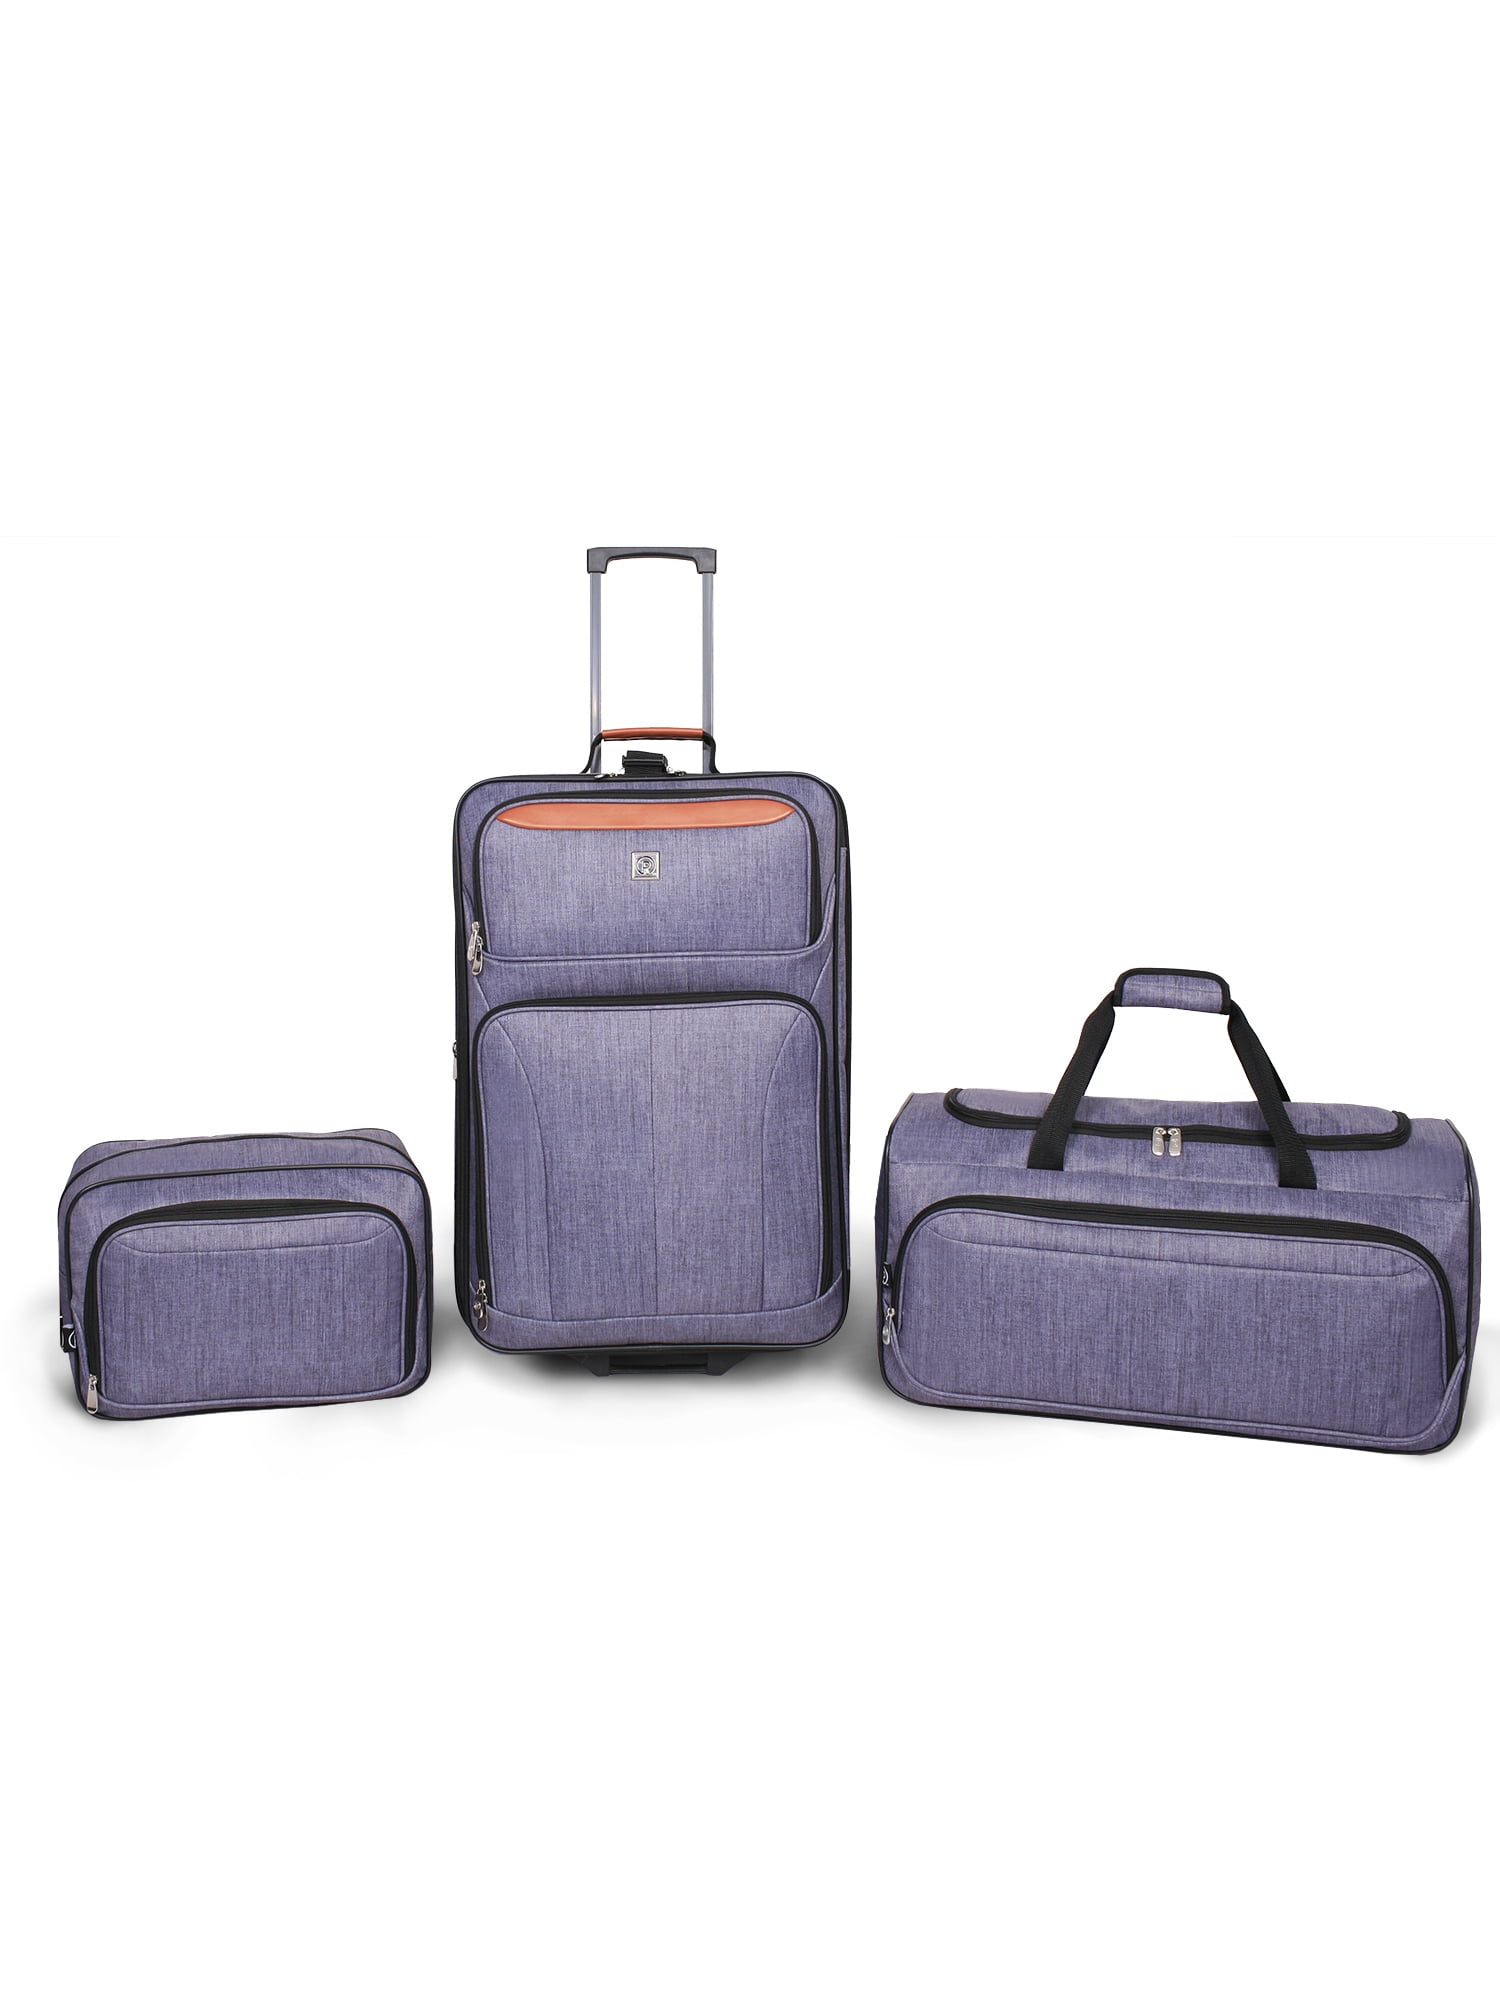 Multicolor American Tourister Luggage Bags